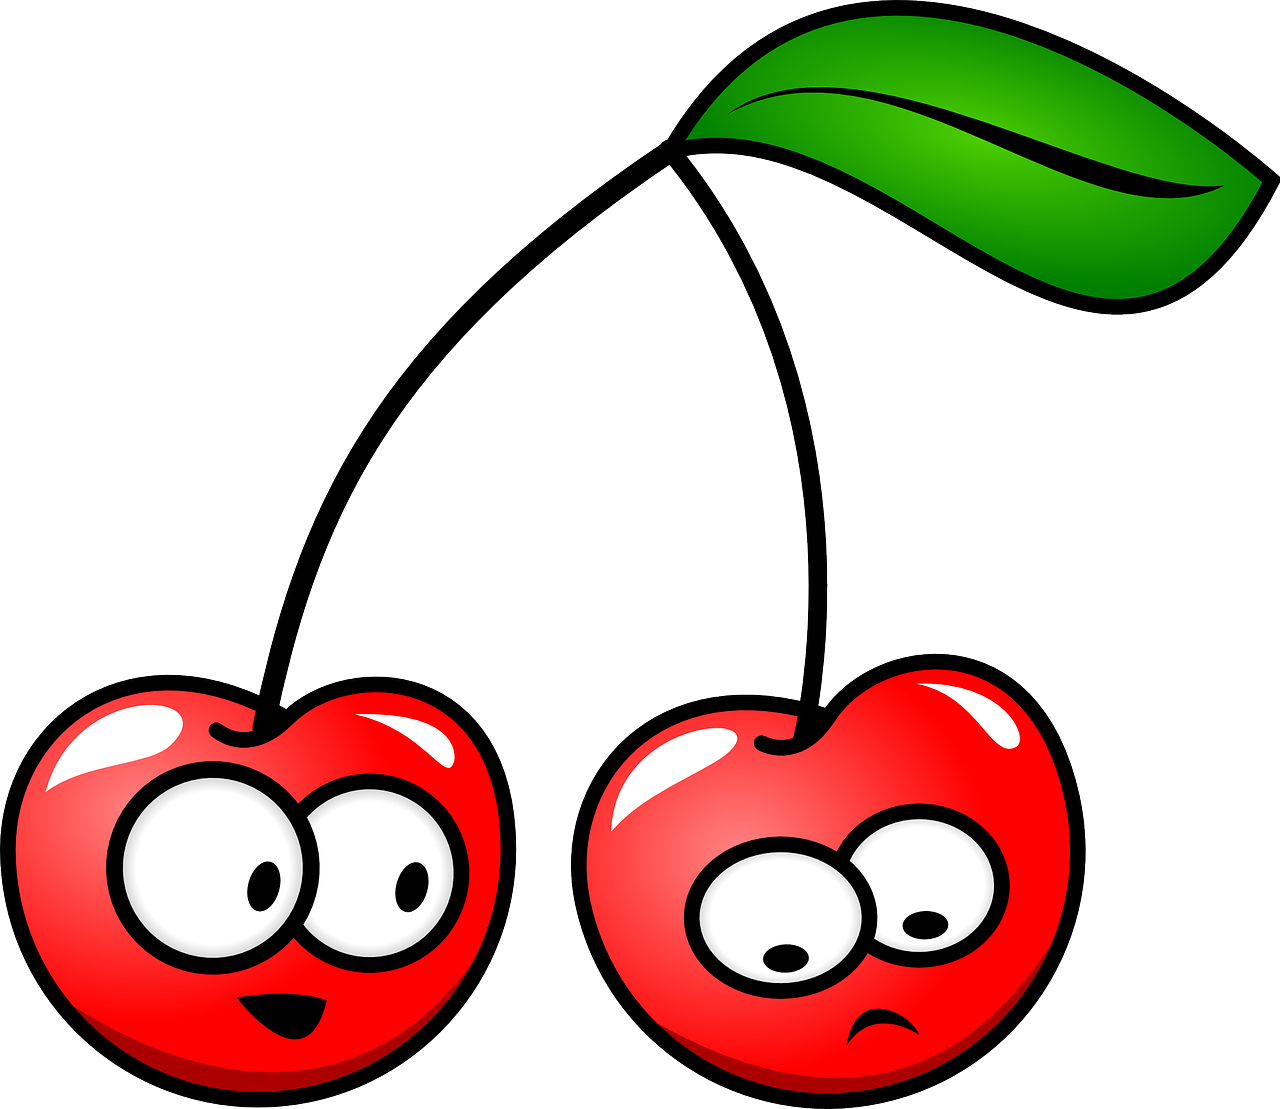 cherry-150077_1280.png